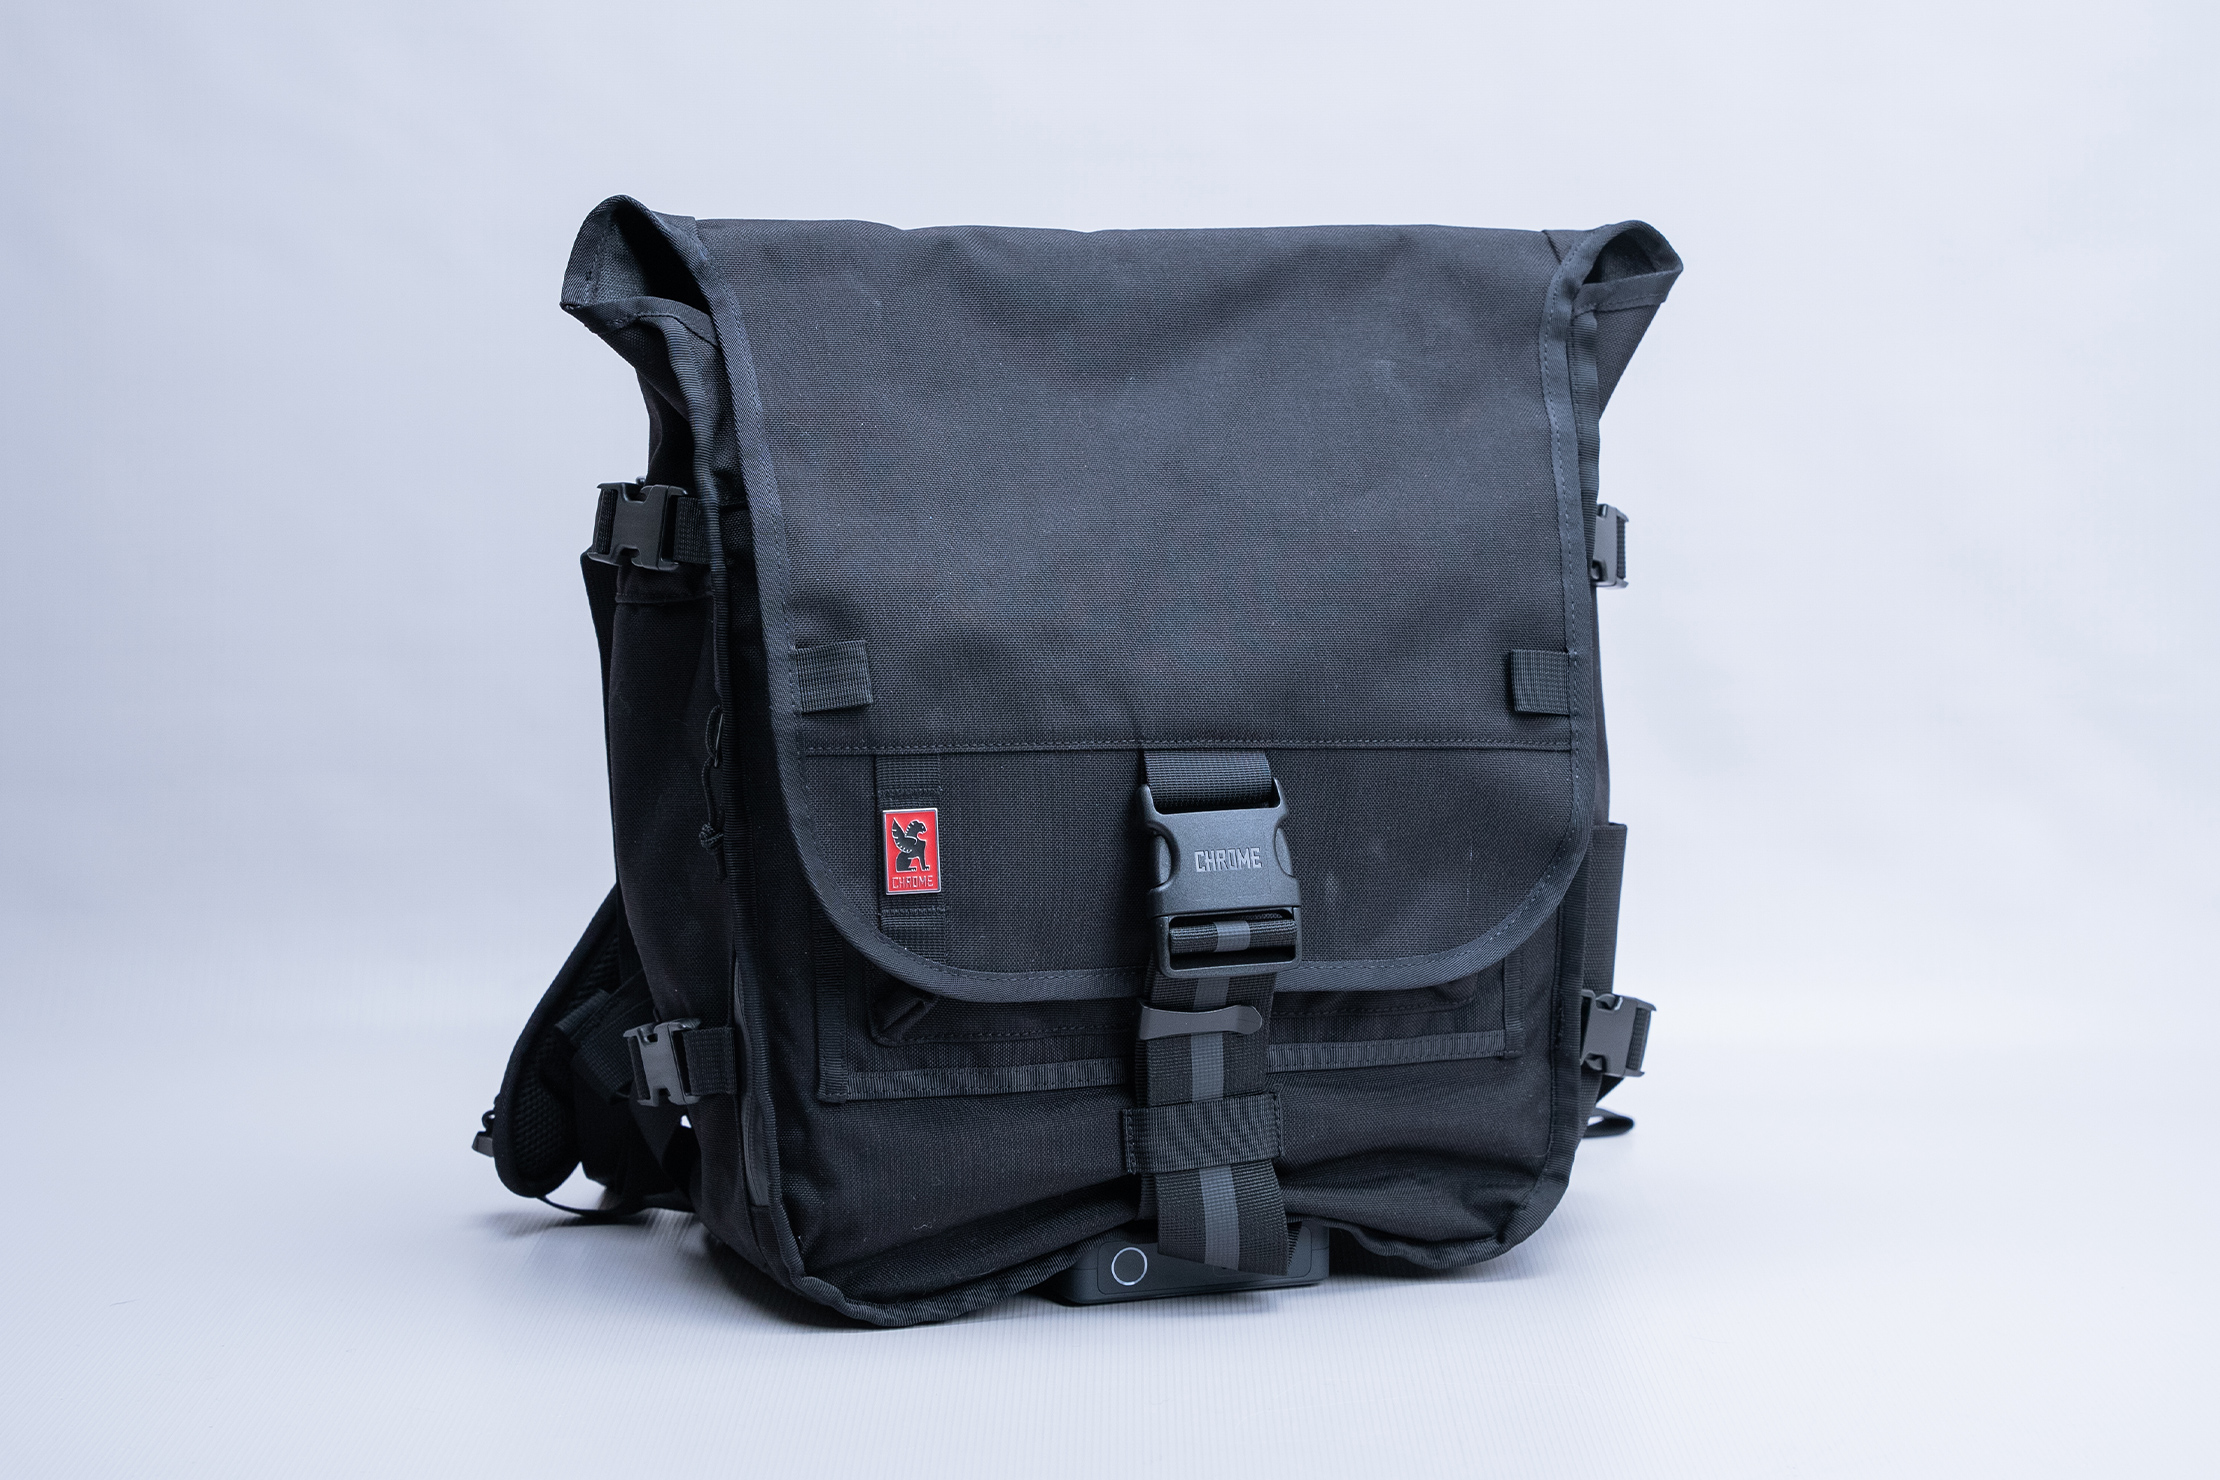 Chrome Industries Warsaw Backpack MD Full